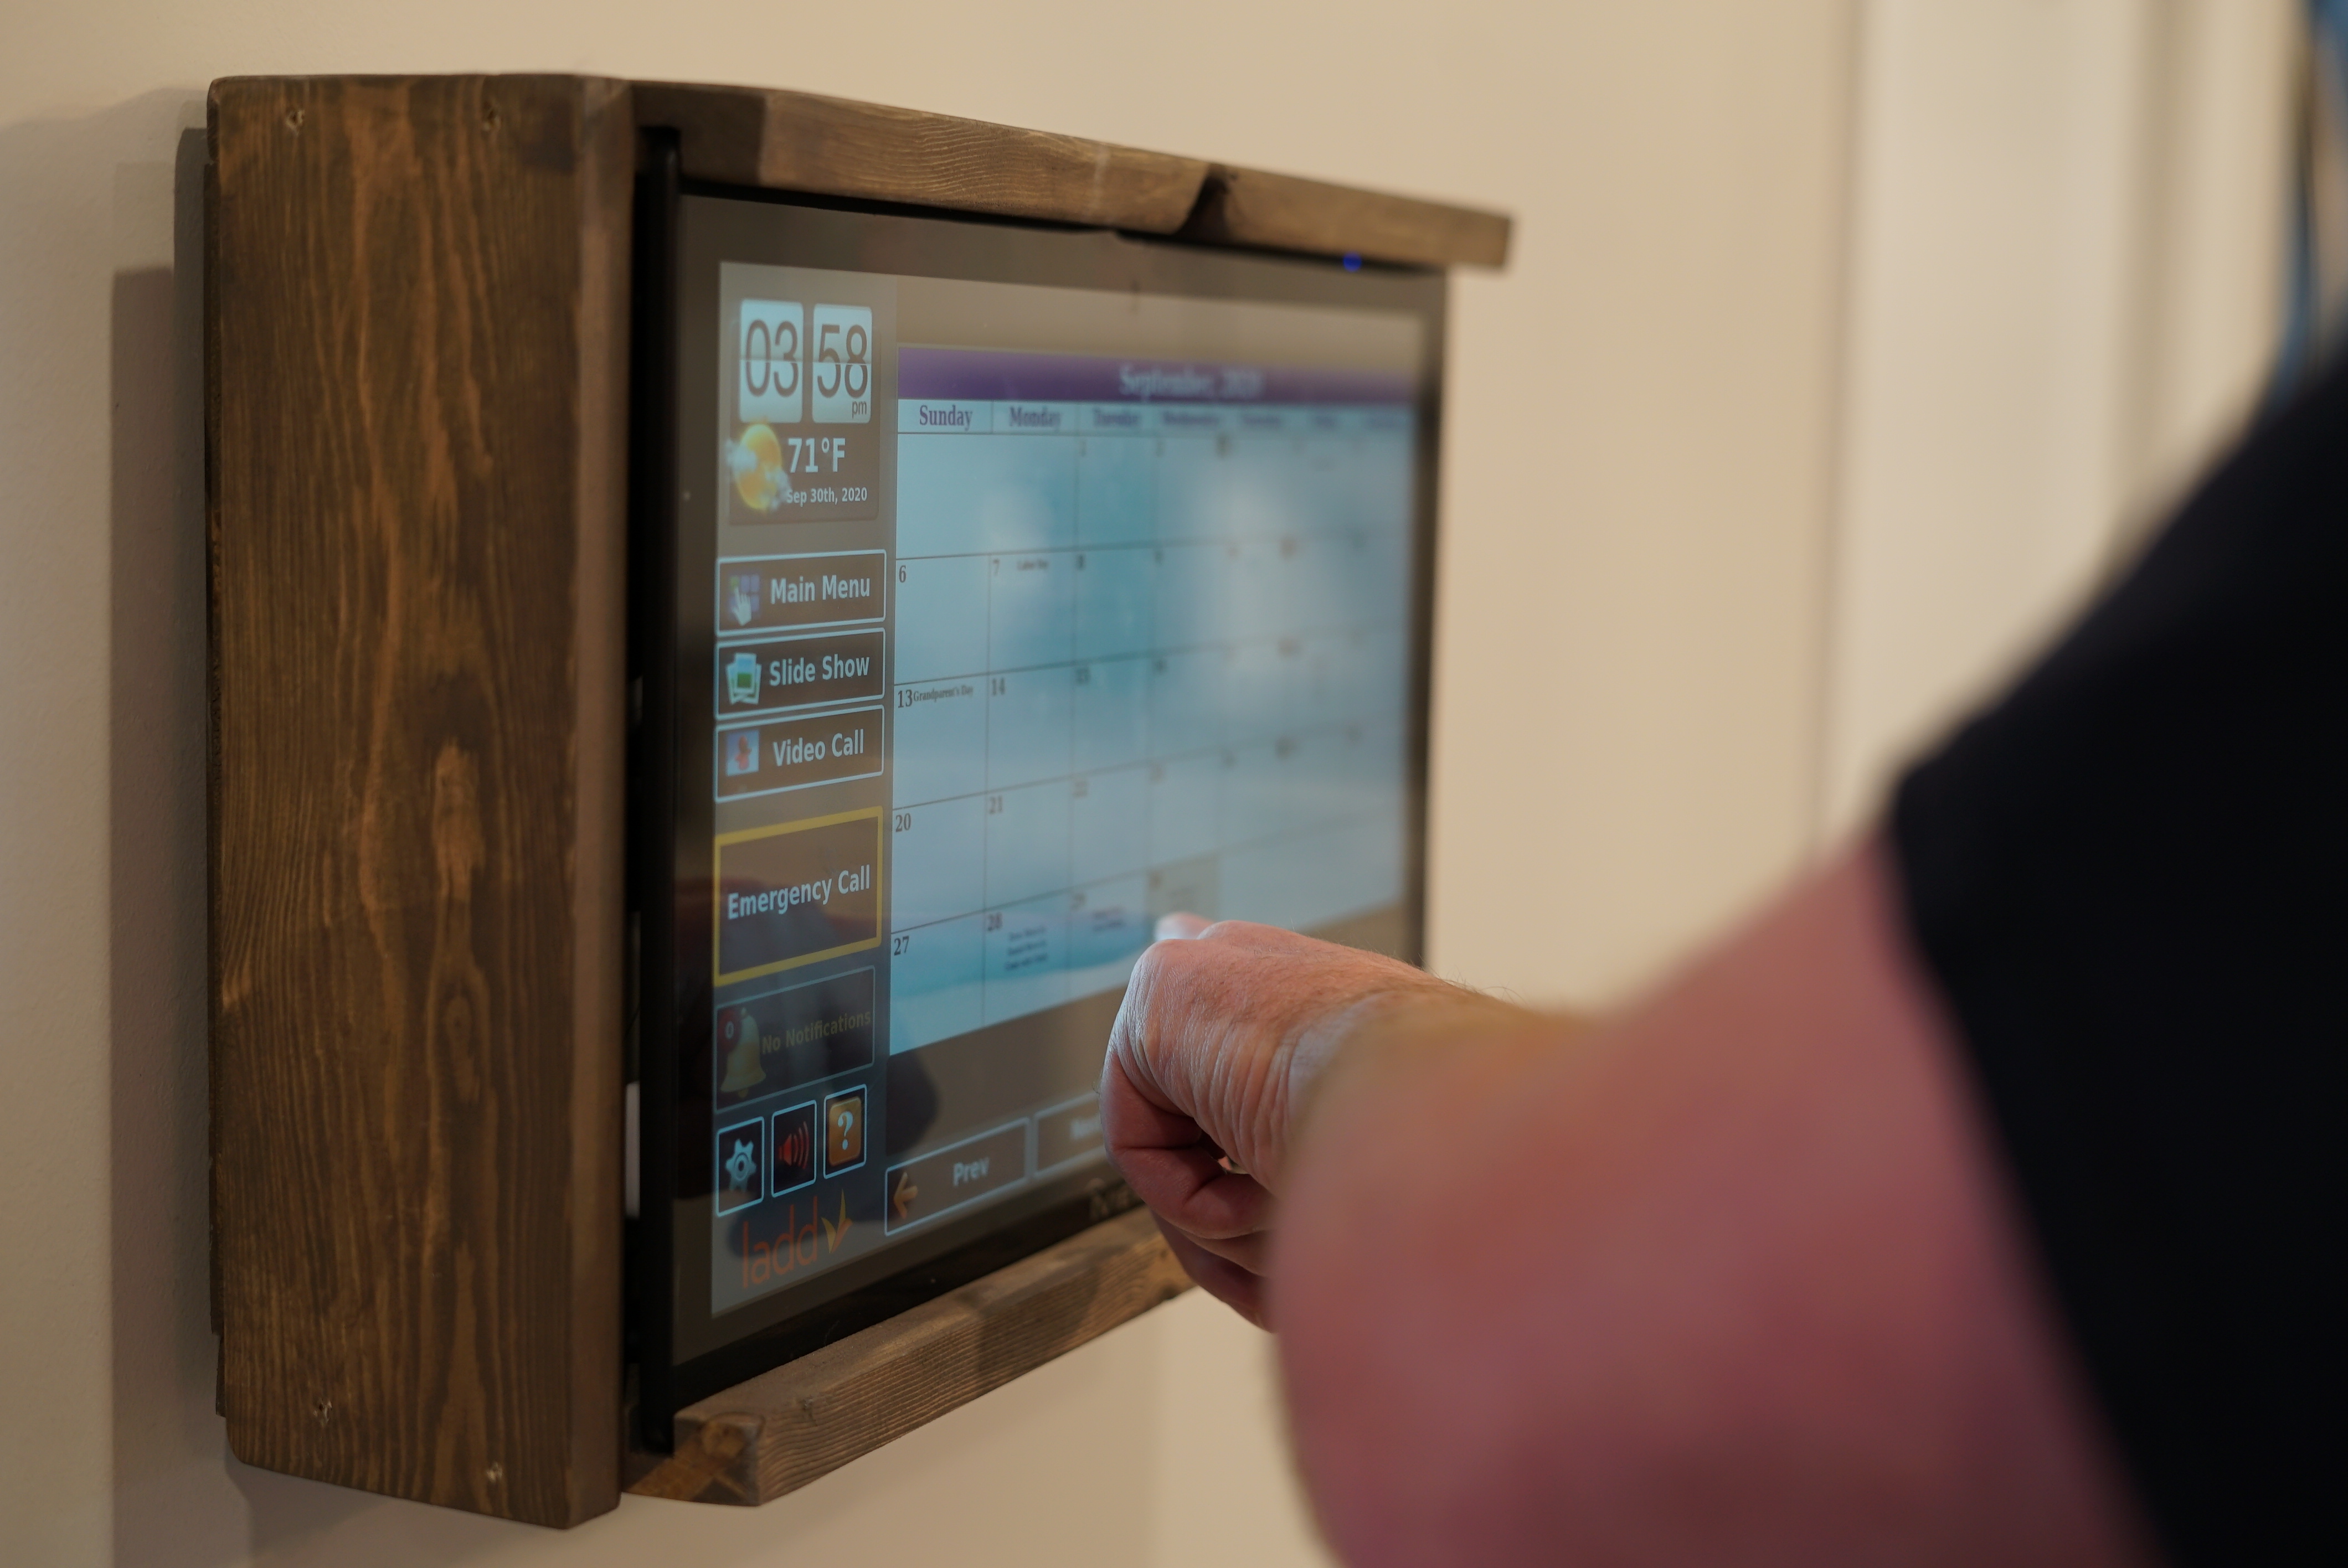 Someone is touching a virtual screen mounted to a wall. The virtual screen shows things like a calendar, emergency call button, schedule button and more.